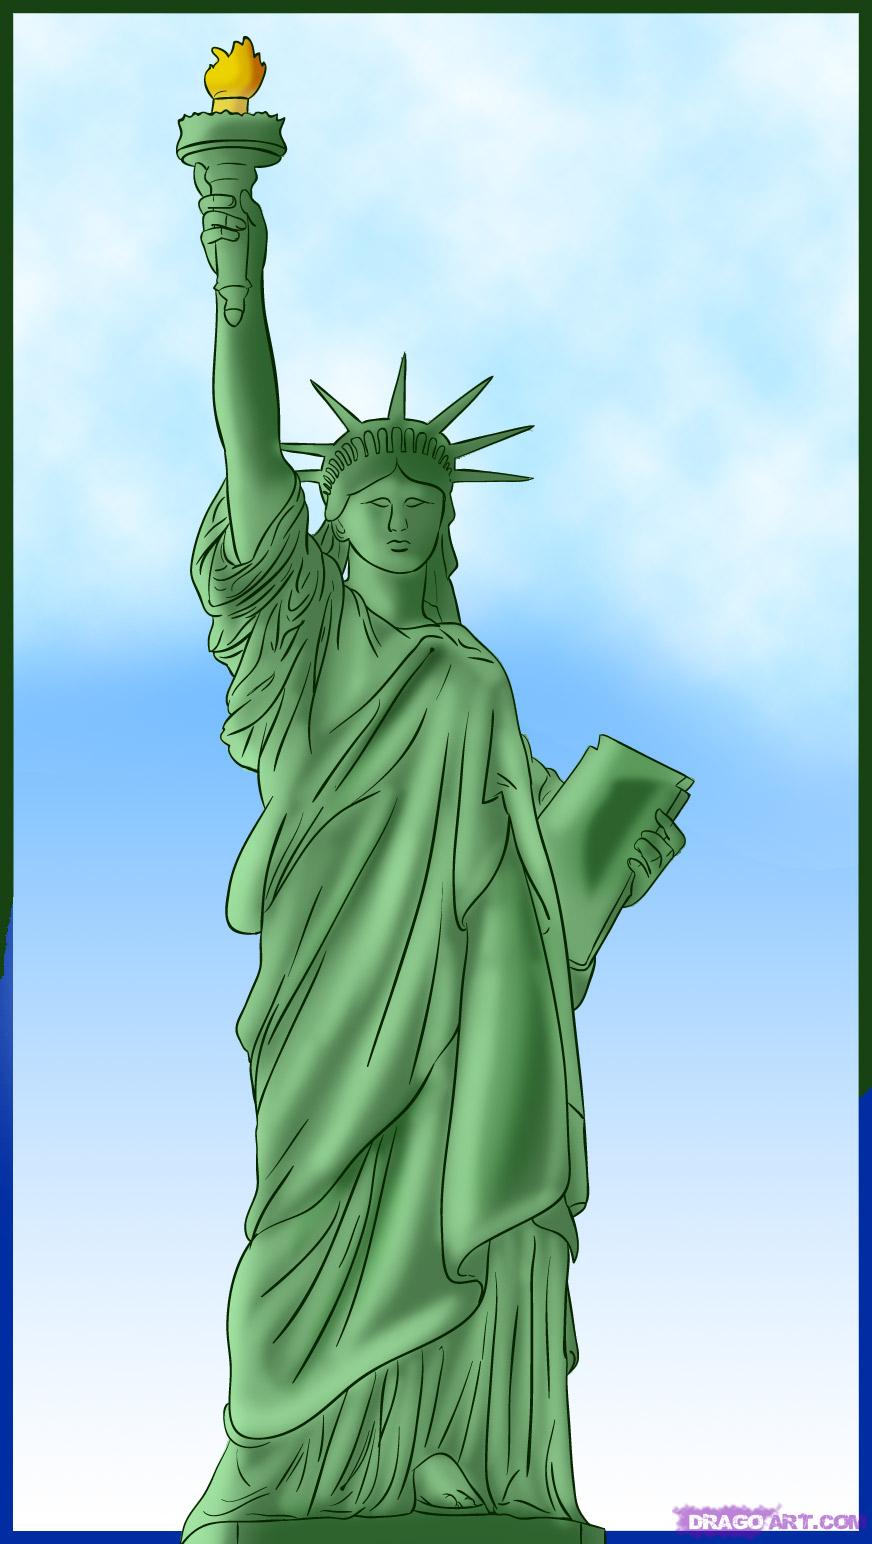 Learn How To Draw Statue Of Liberty Statues Step By S vrogue.co